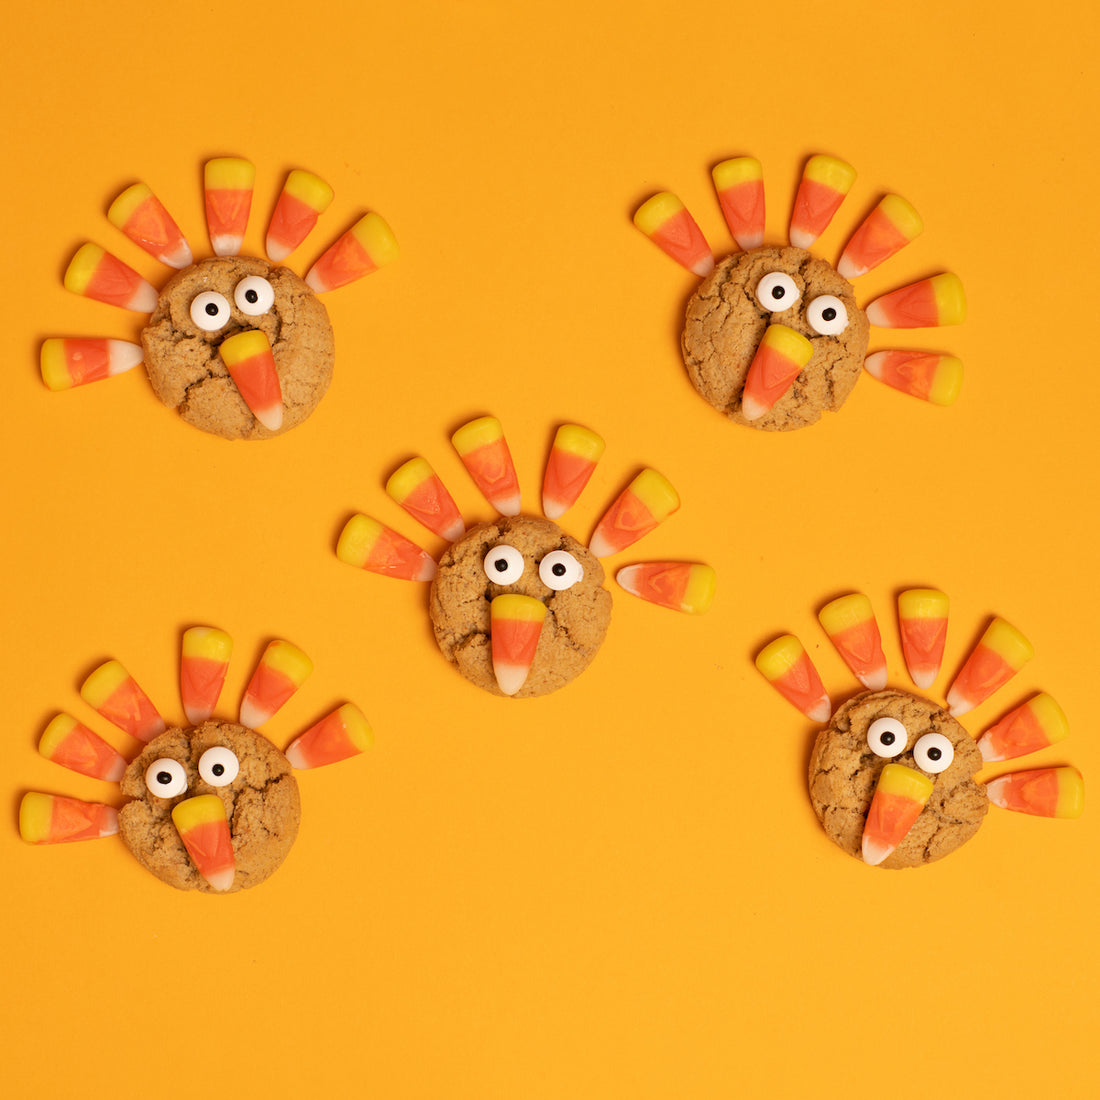 5 Kid-Friendly Thanksgiving Ideas to Keep Busy Until Dinner